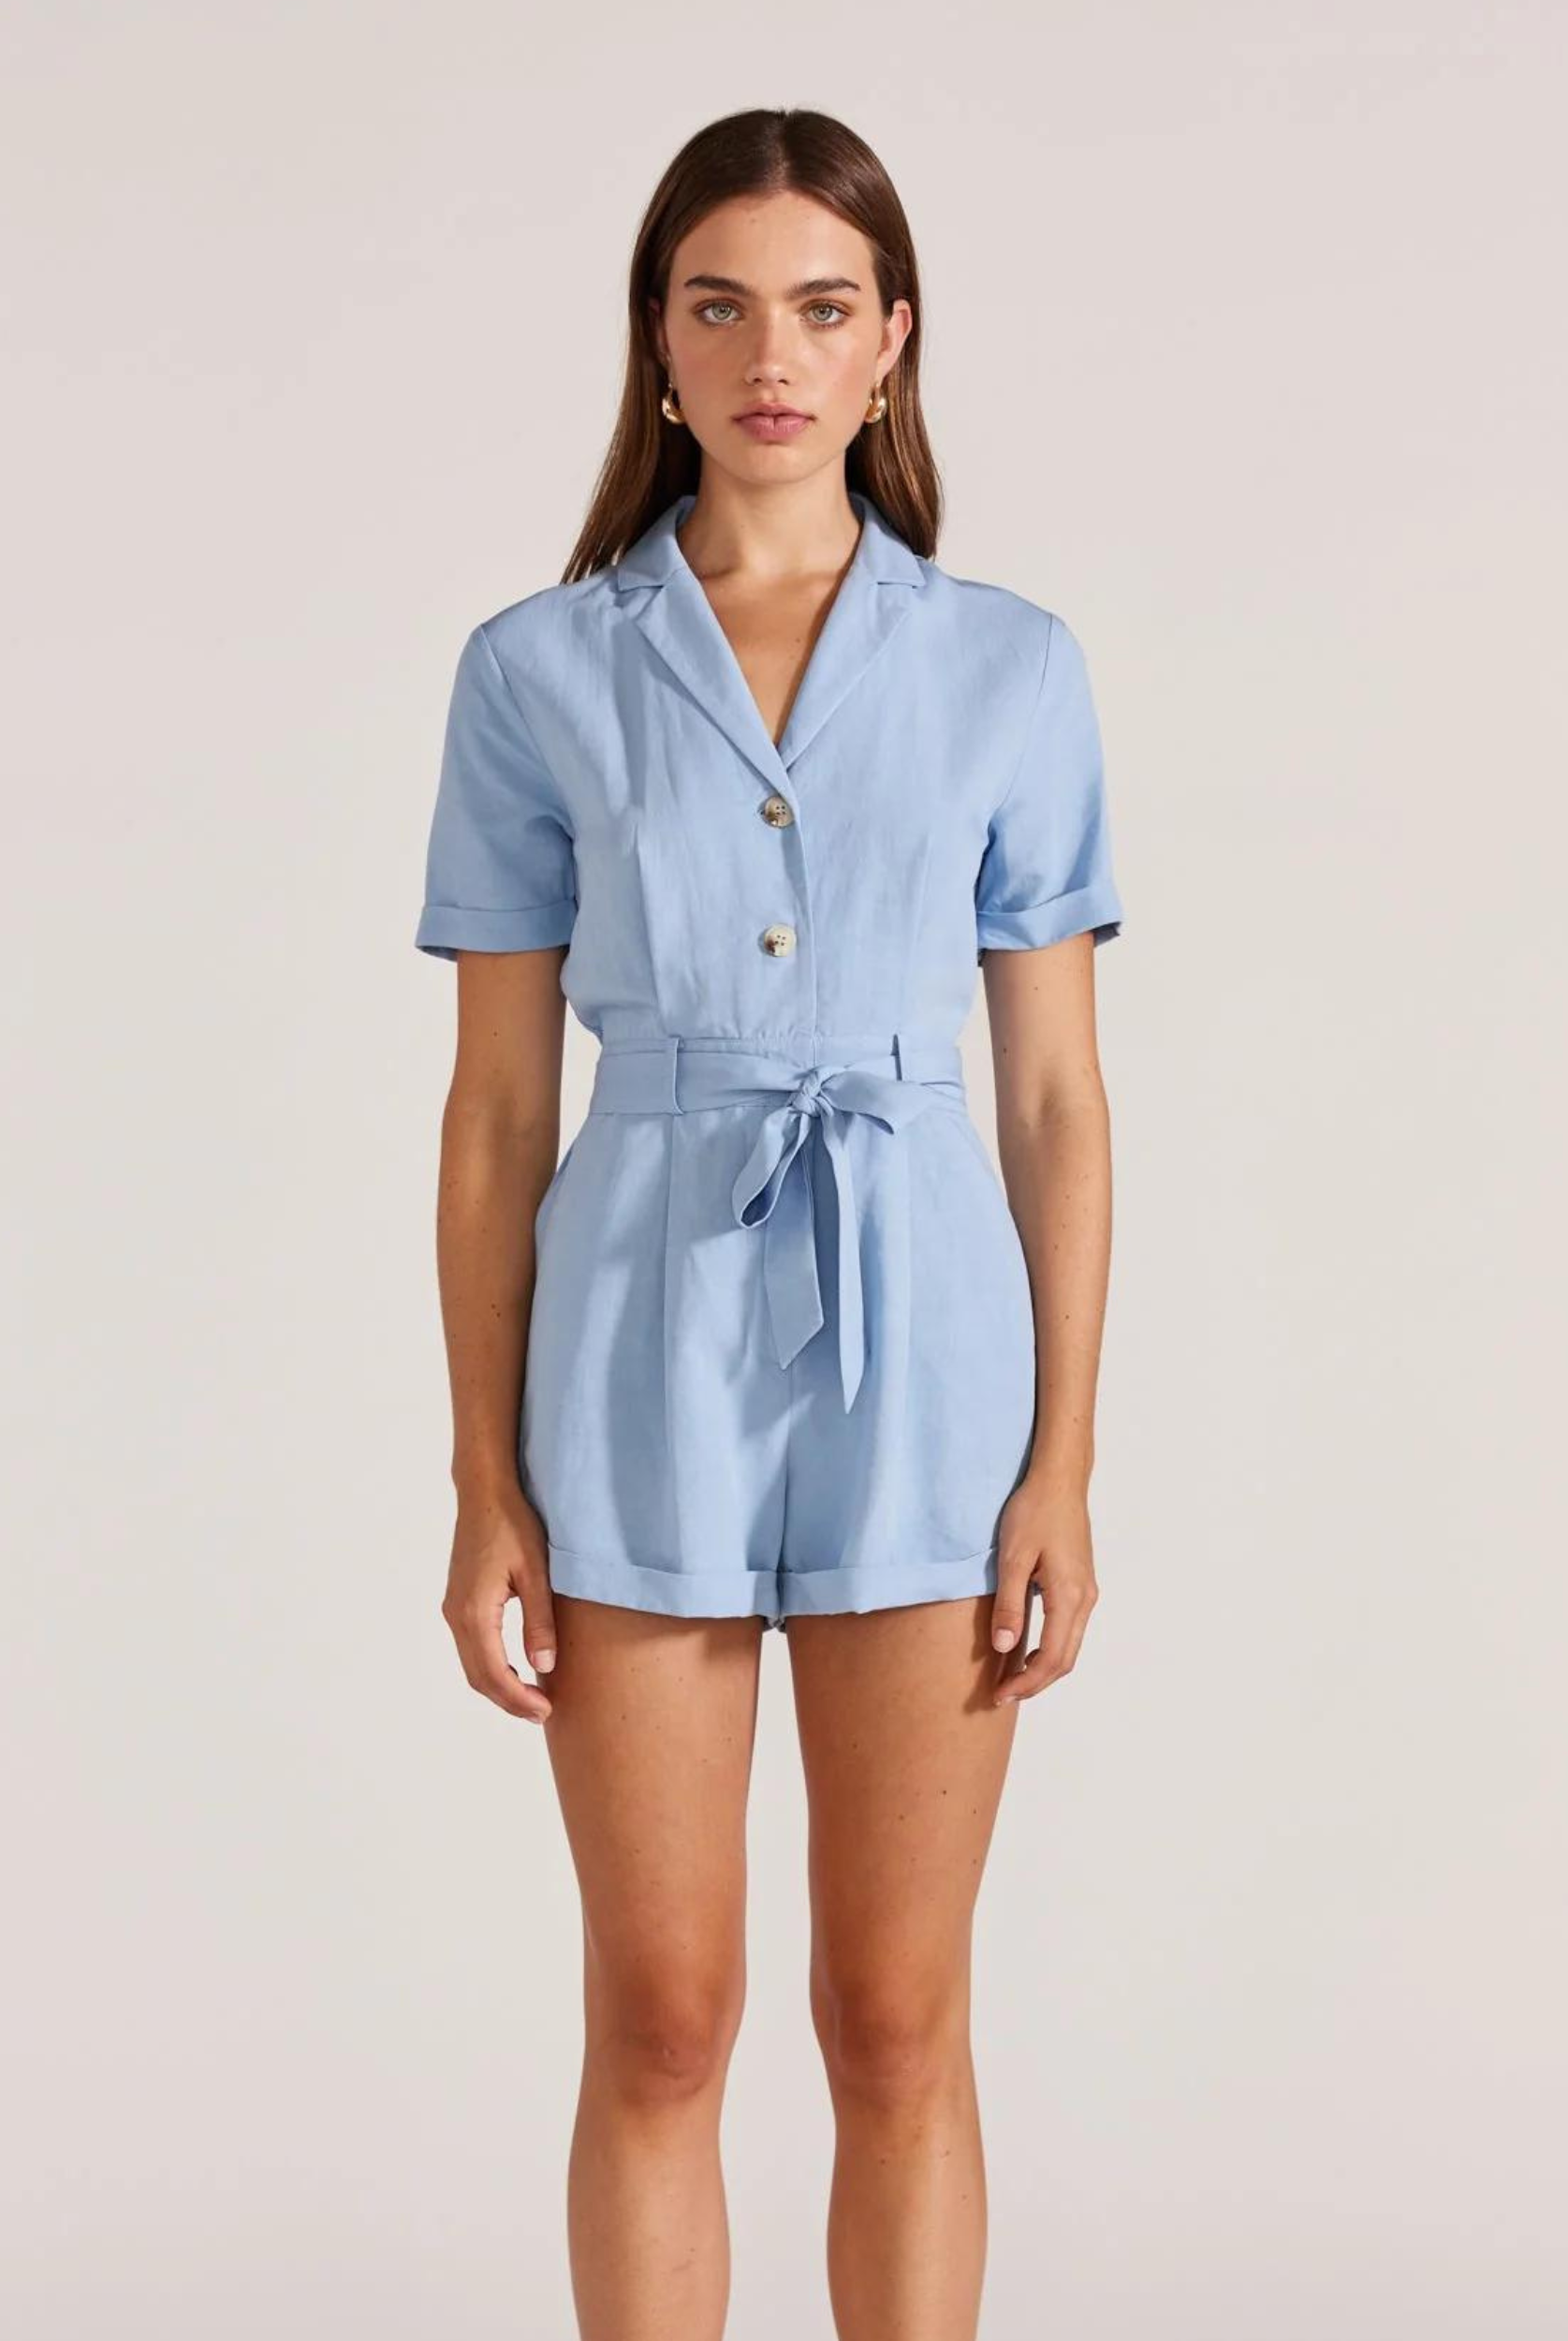 Model wearing pale blue playsuit from Staple the Label